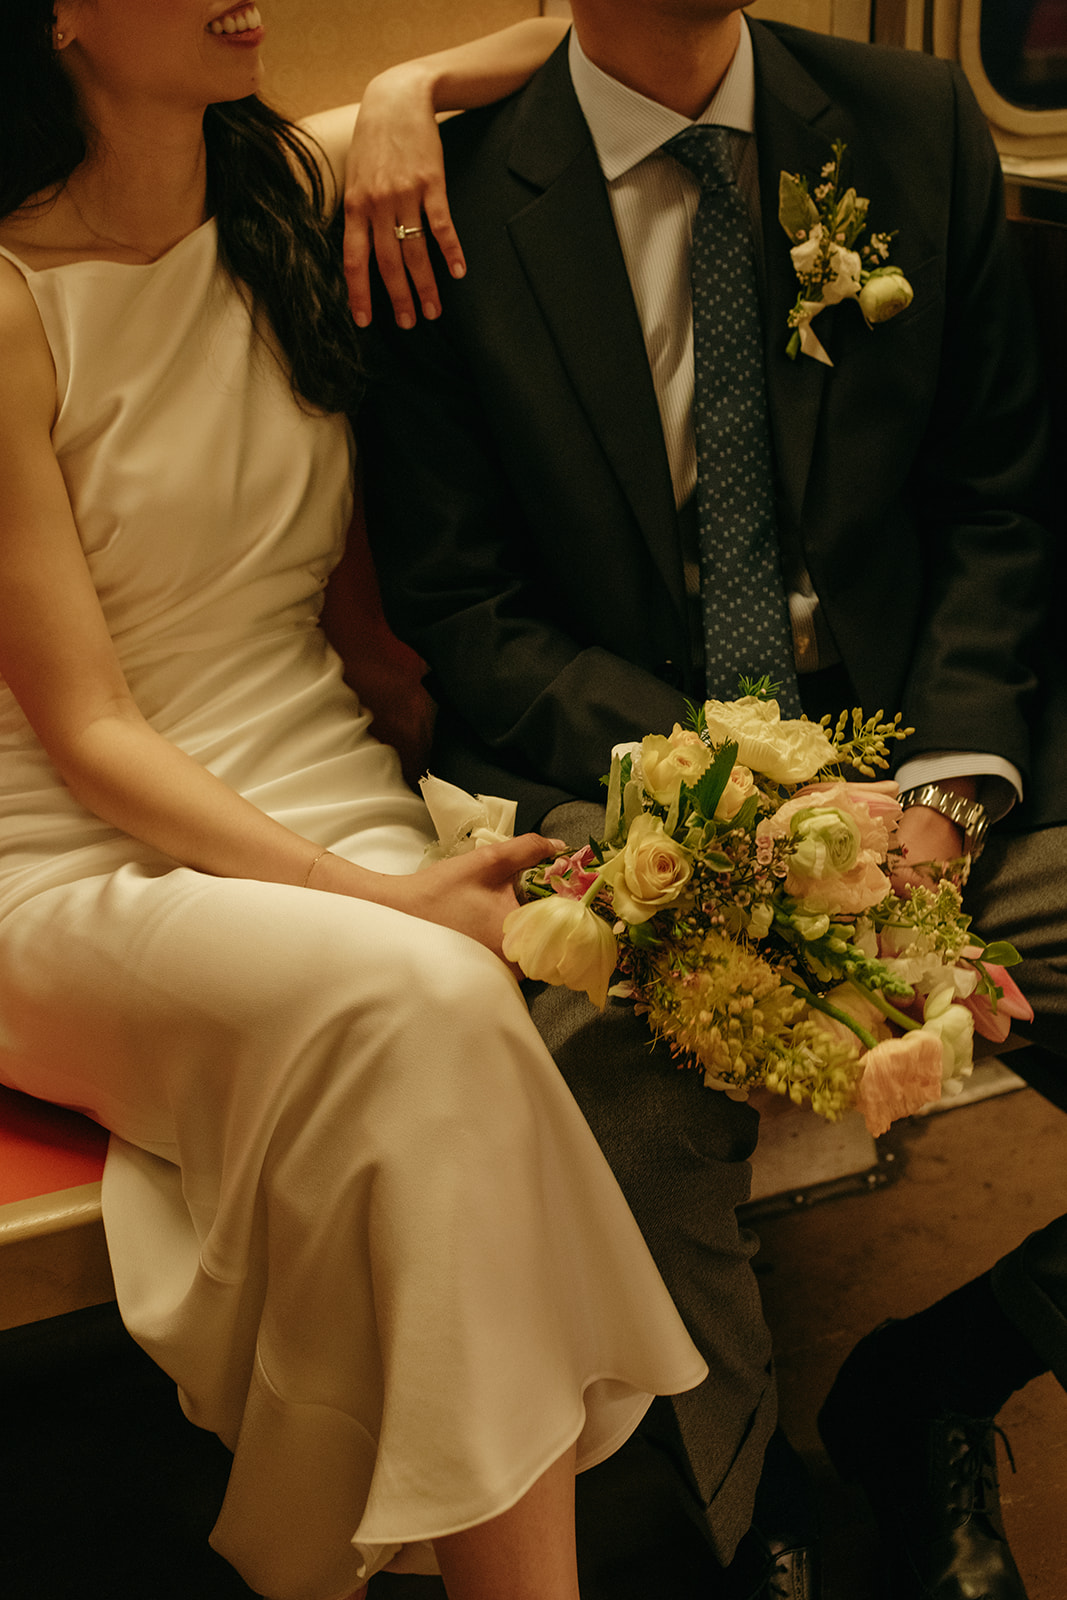 detail shot of nyc couple after elopement at city hall